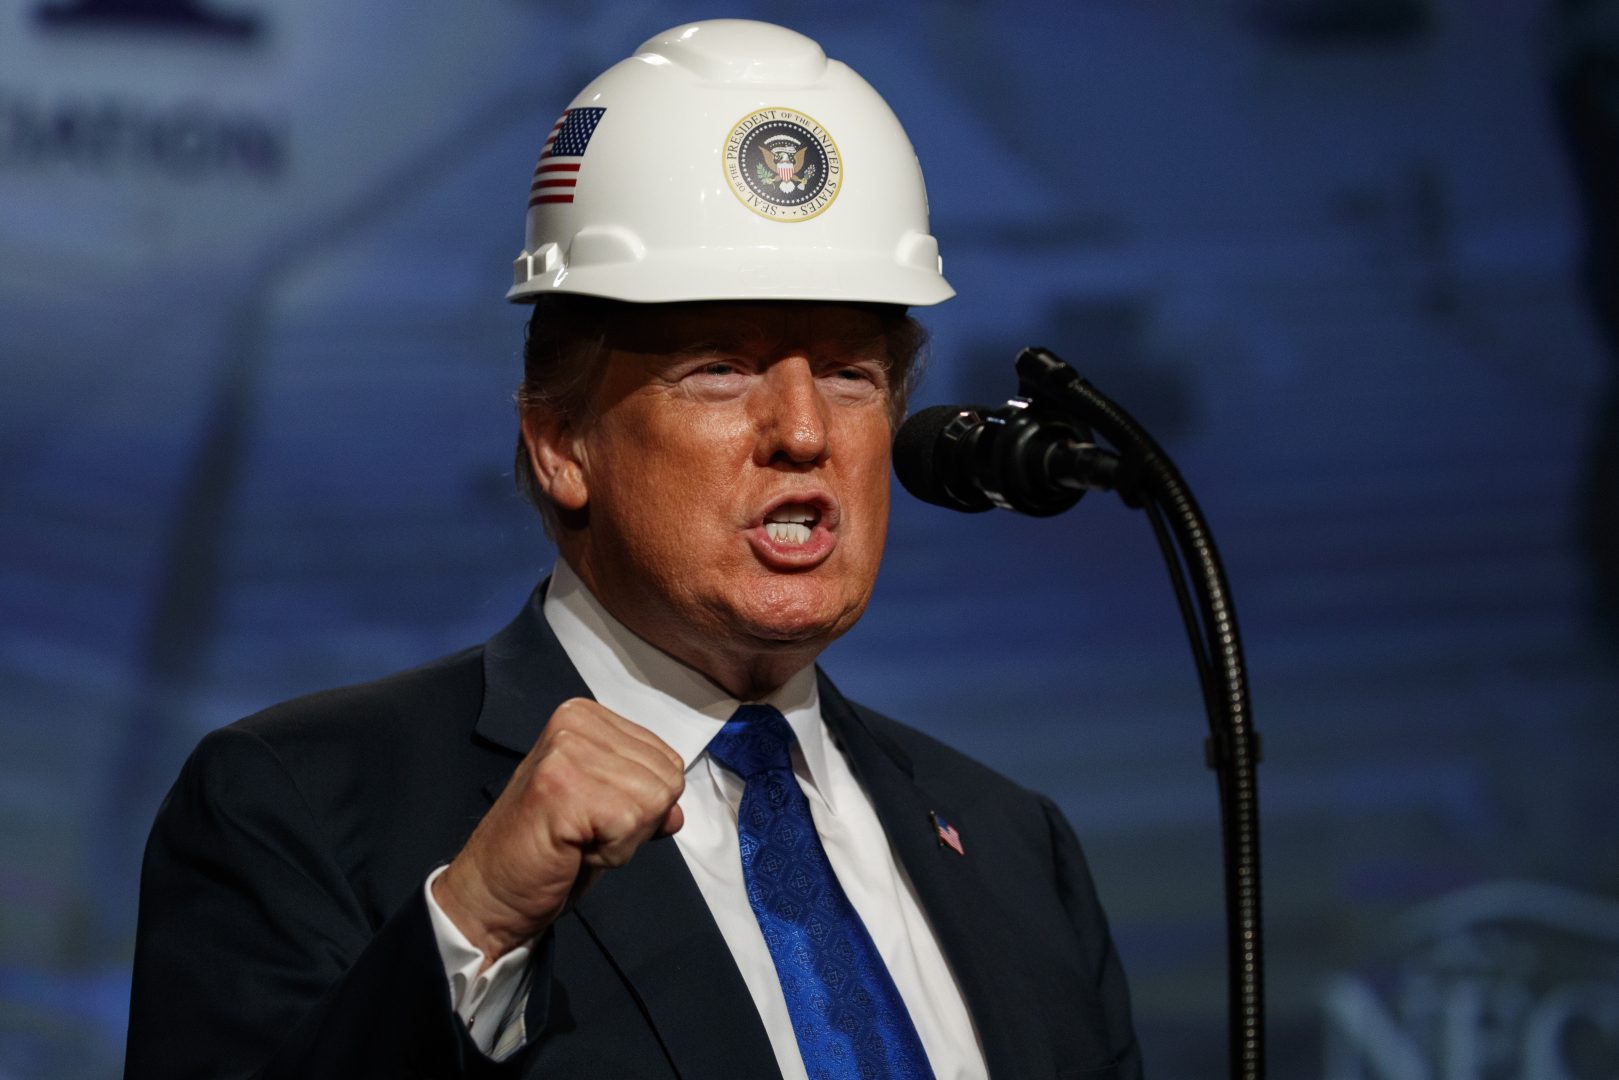 President Donald Trump pumps his fist after putting on a hard hat given to him before speaking to the National Electrical Contractors Association Convention at the Pennsylvania Convention Center, Tuesday, Oct. 2, 2018, in Philadelphia. 